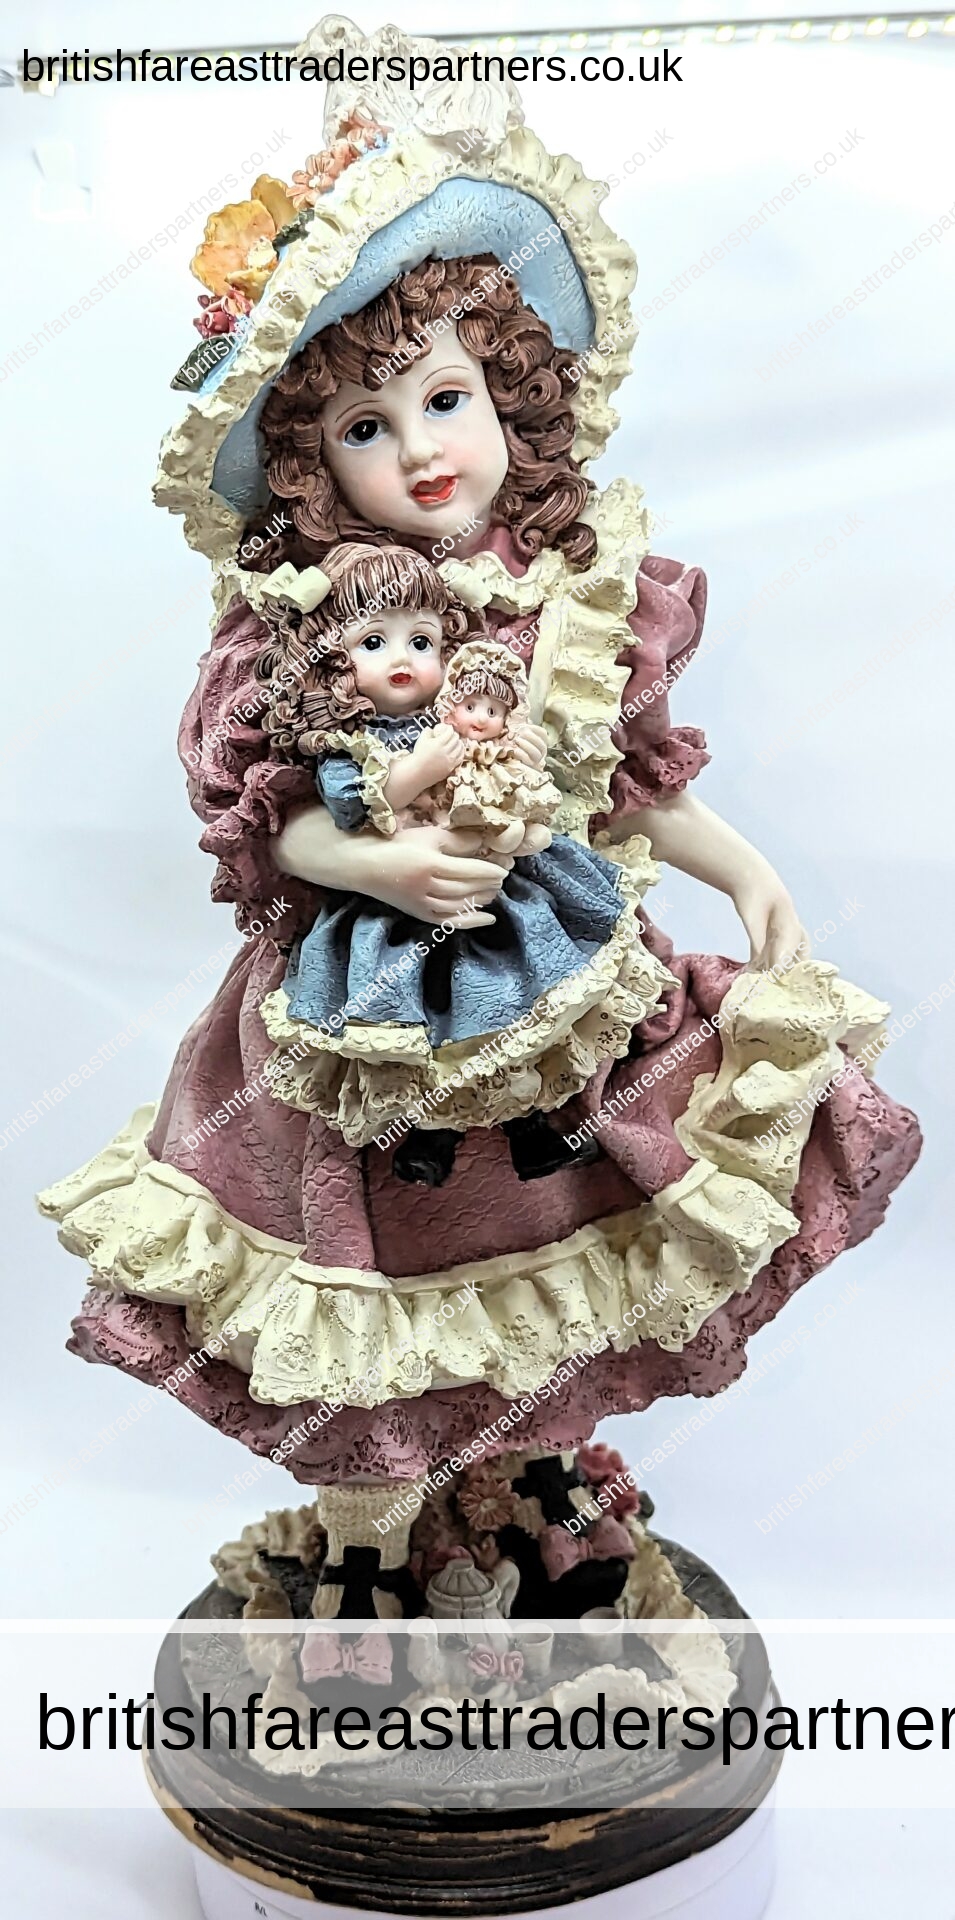 🌸✨ Dive into a world of Victorian elegance with this exquisite figurine. Experience a tapestry of colors and intricate details that narrate tales from a golden era. A must-have for vintage enthusiasts. 🎁💫